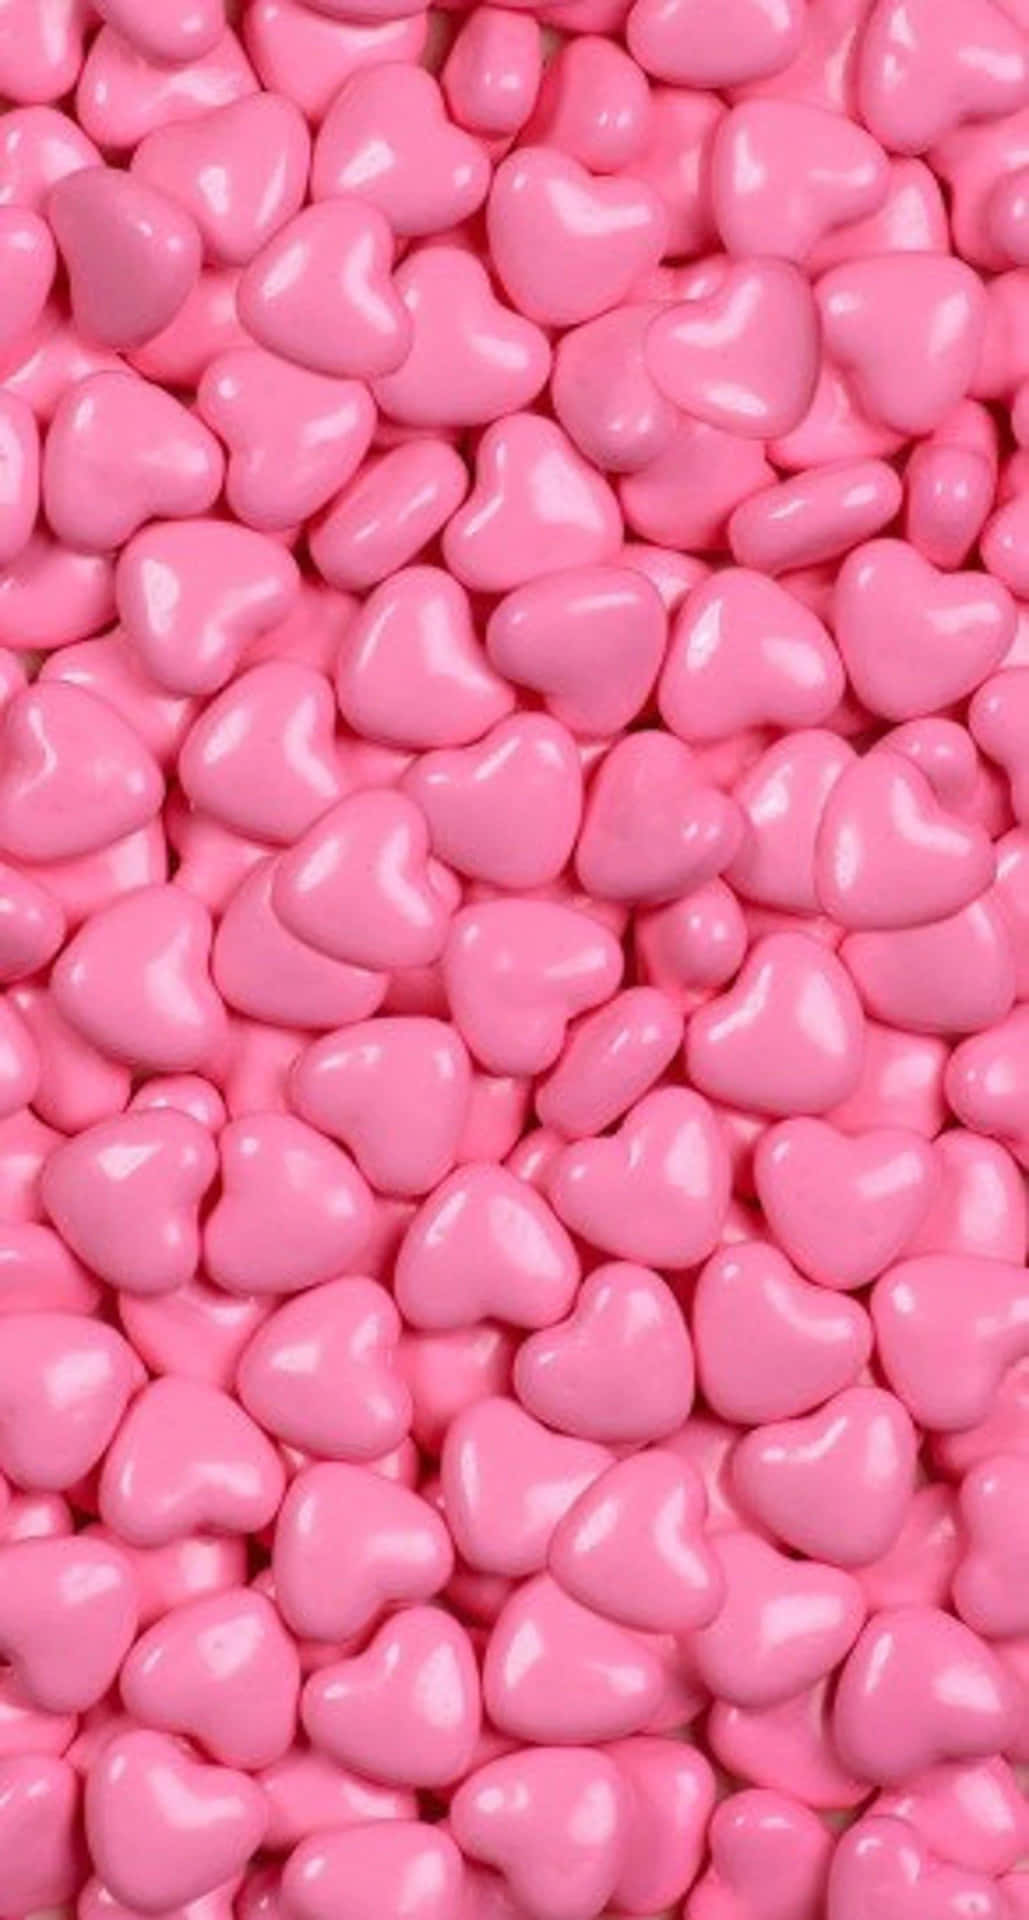 Delectable Pink Candy Delights Wallpaper